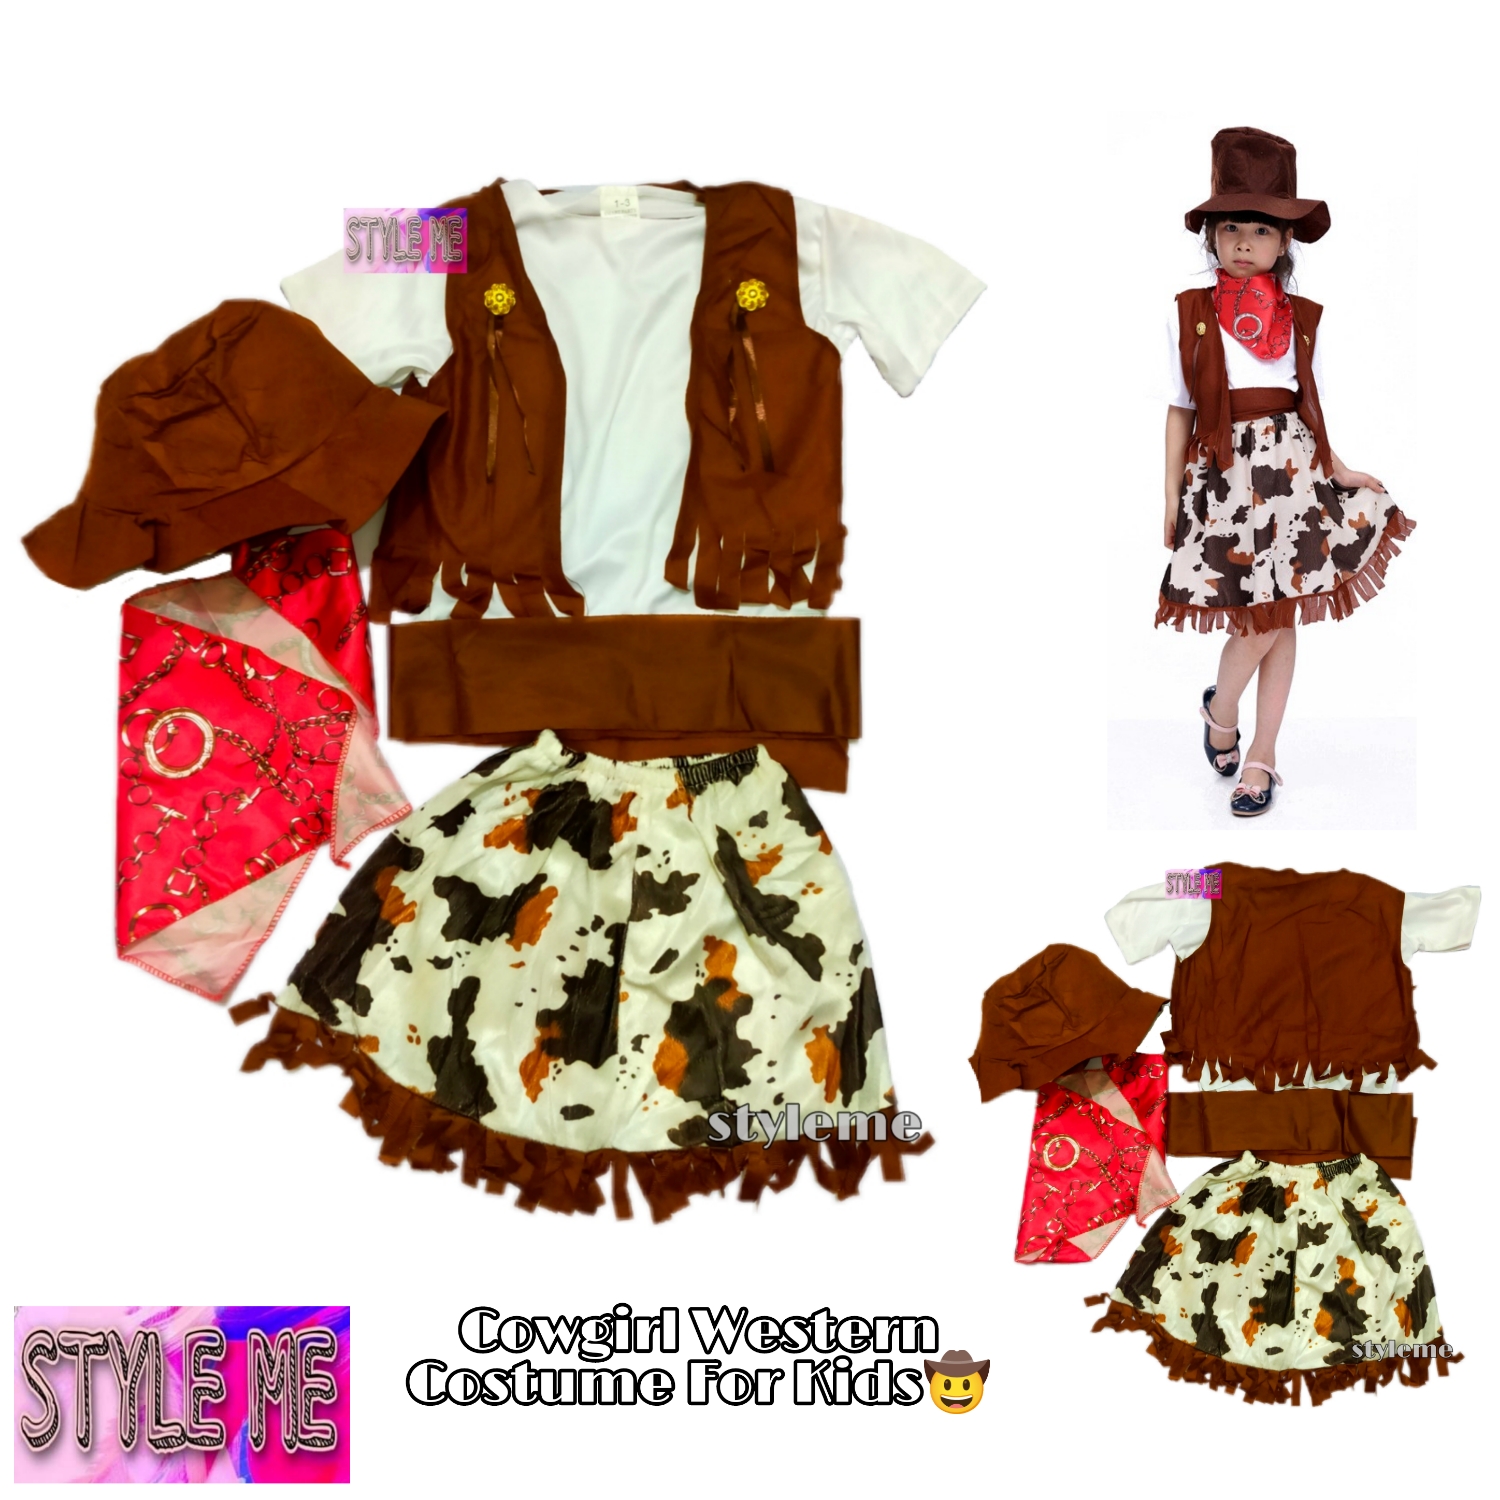 COW GIRL WESTERN ROLE PLAY COSPLAY COSTUME SET FOR KIDS 1-12 YEARS OLD ...